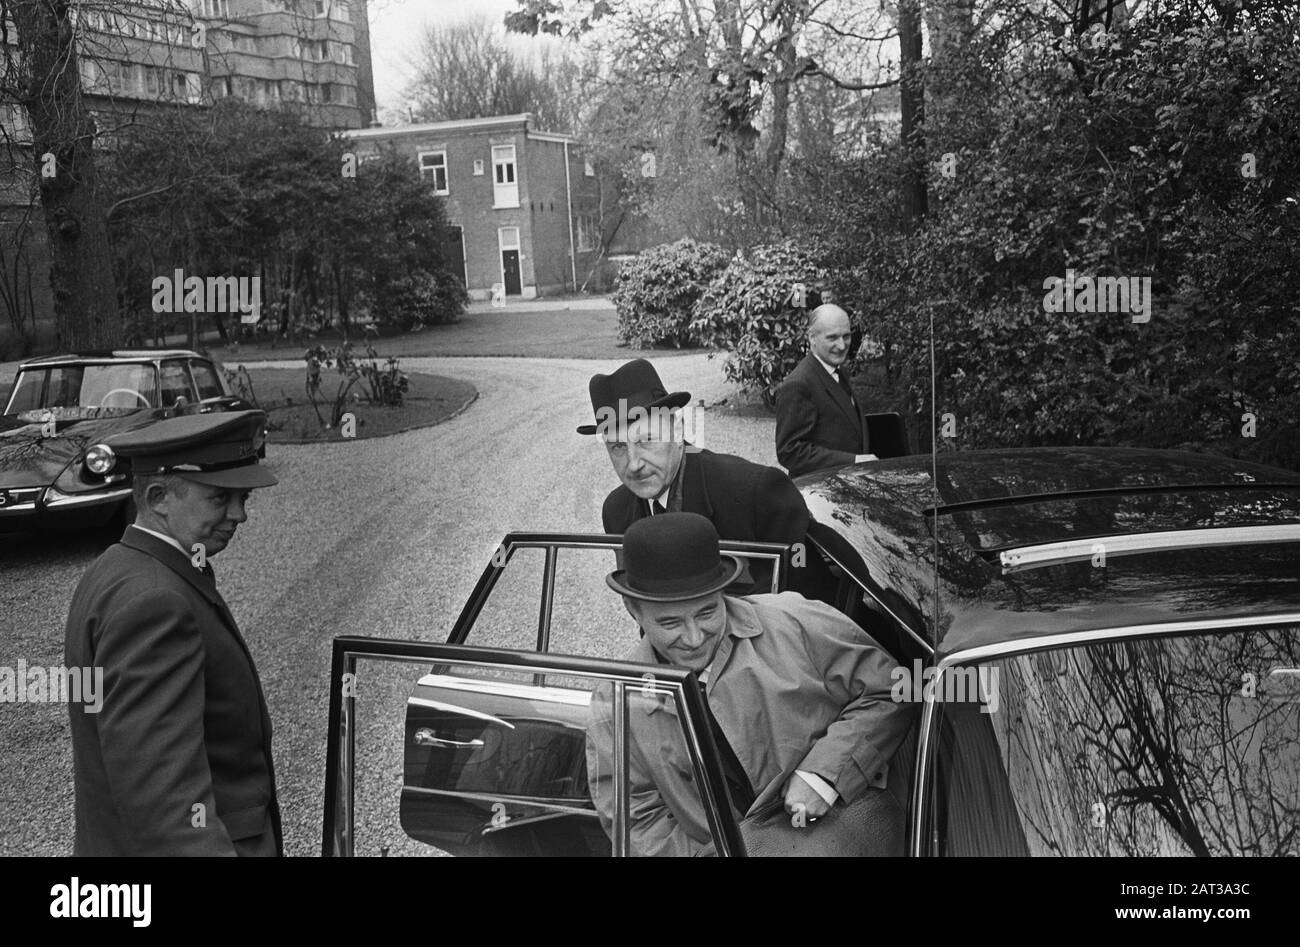 The cabinet, candidate ministers meeting, no. 8 Mr De Jong, Luns en Bot in  the car, no. 6, 7 Mr Samkalden and Suurhoff Date: 12 April 1965 Keywords:  cabinets, candidates Personal name: